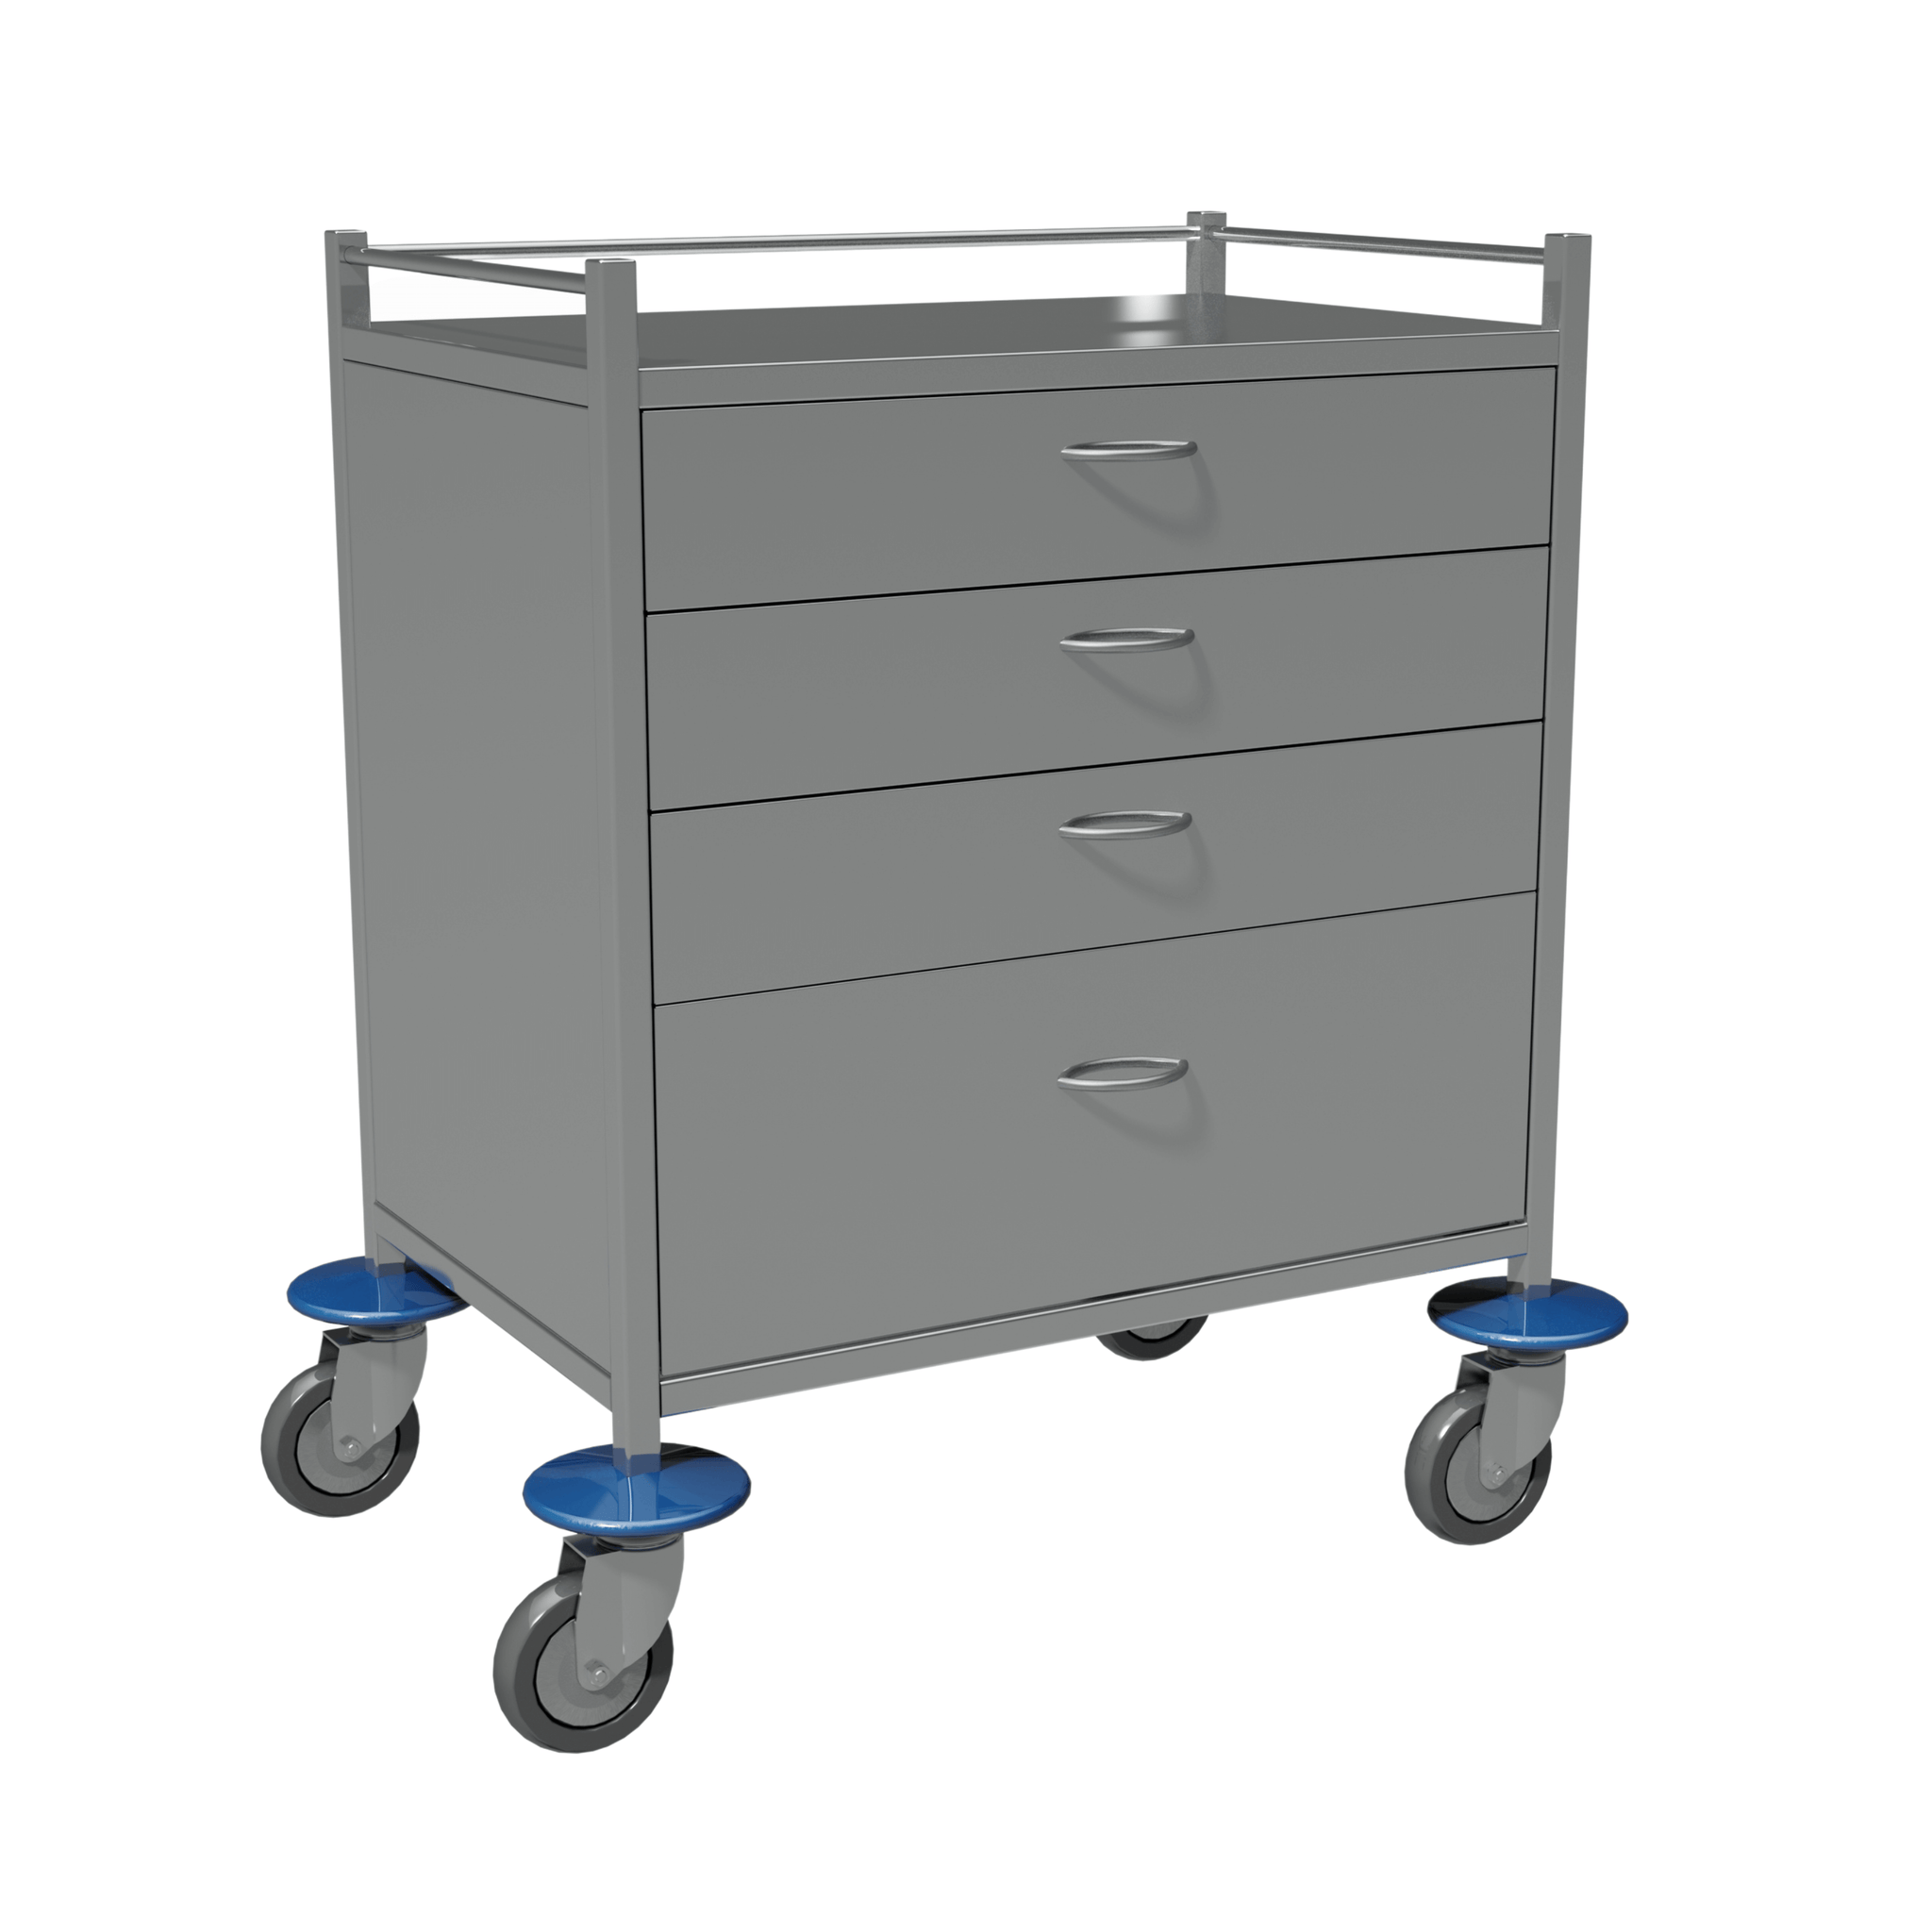 Anaesthetic Trolley- 5 Drawer, 600 X 490 X 900 mm